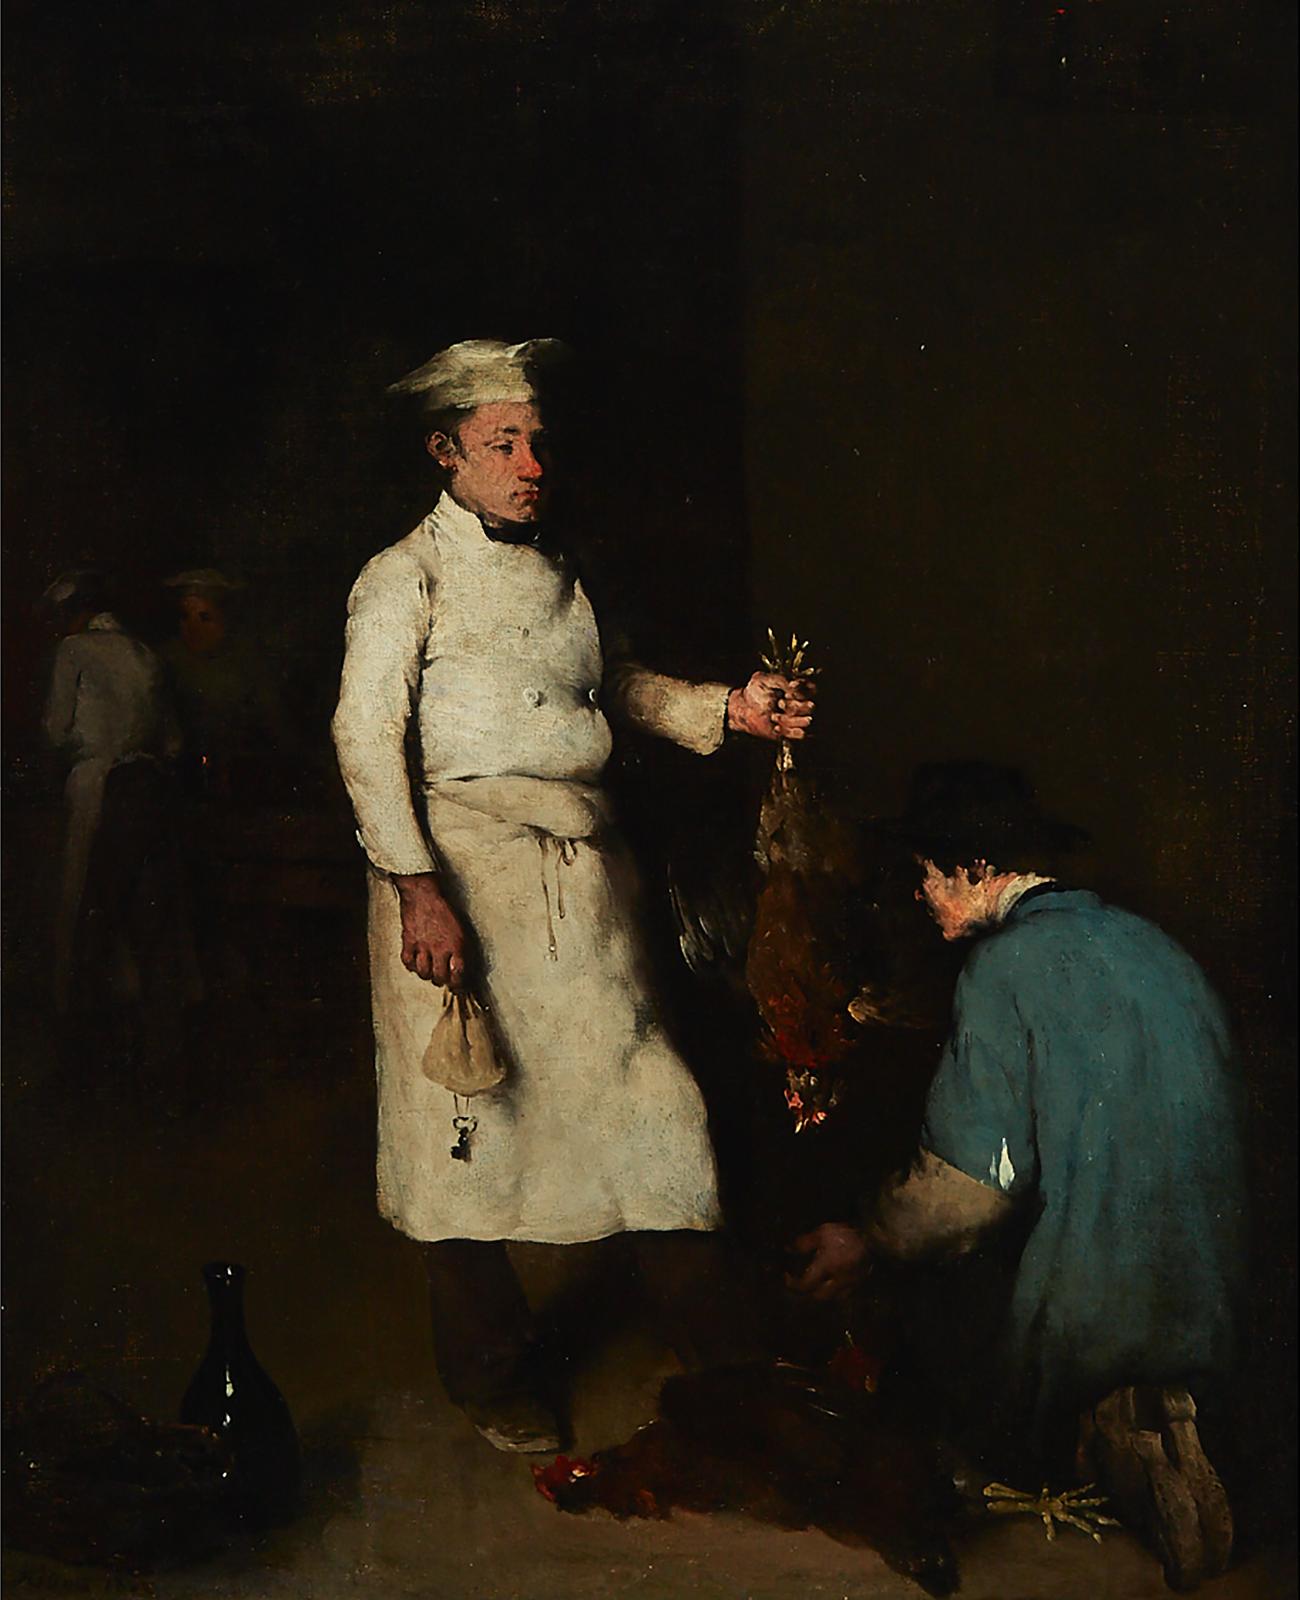 Theodule-Augustin Ribot (1823-1891) - The Chef Buying Poultry (Le Cuisinier), 1865